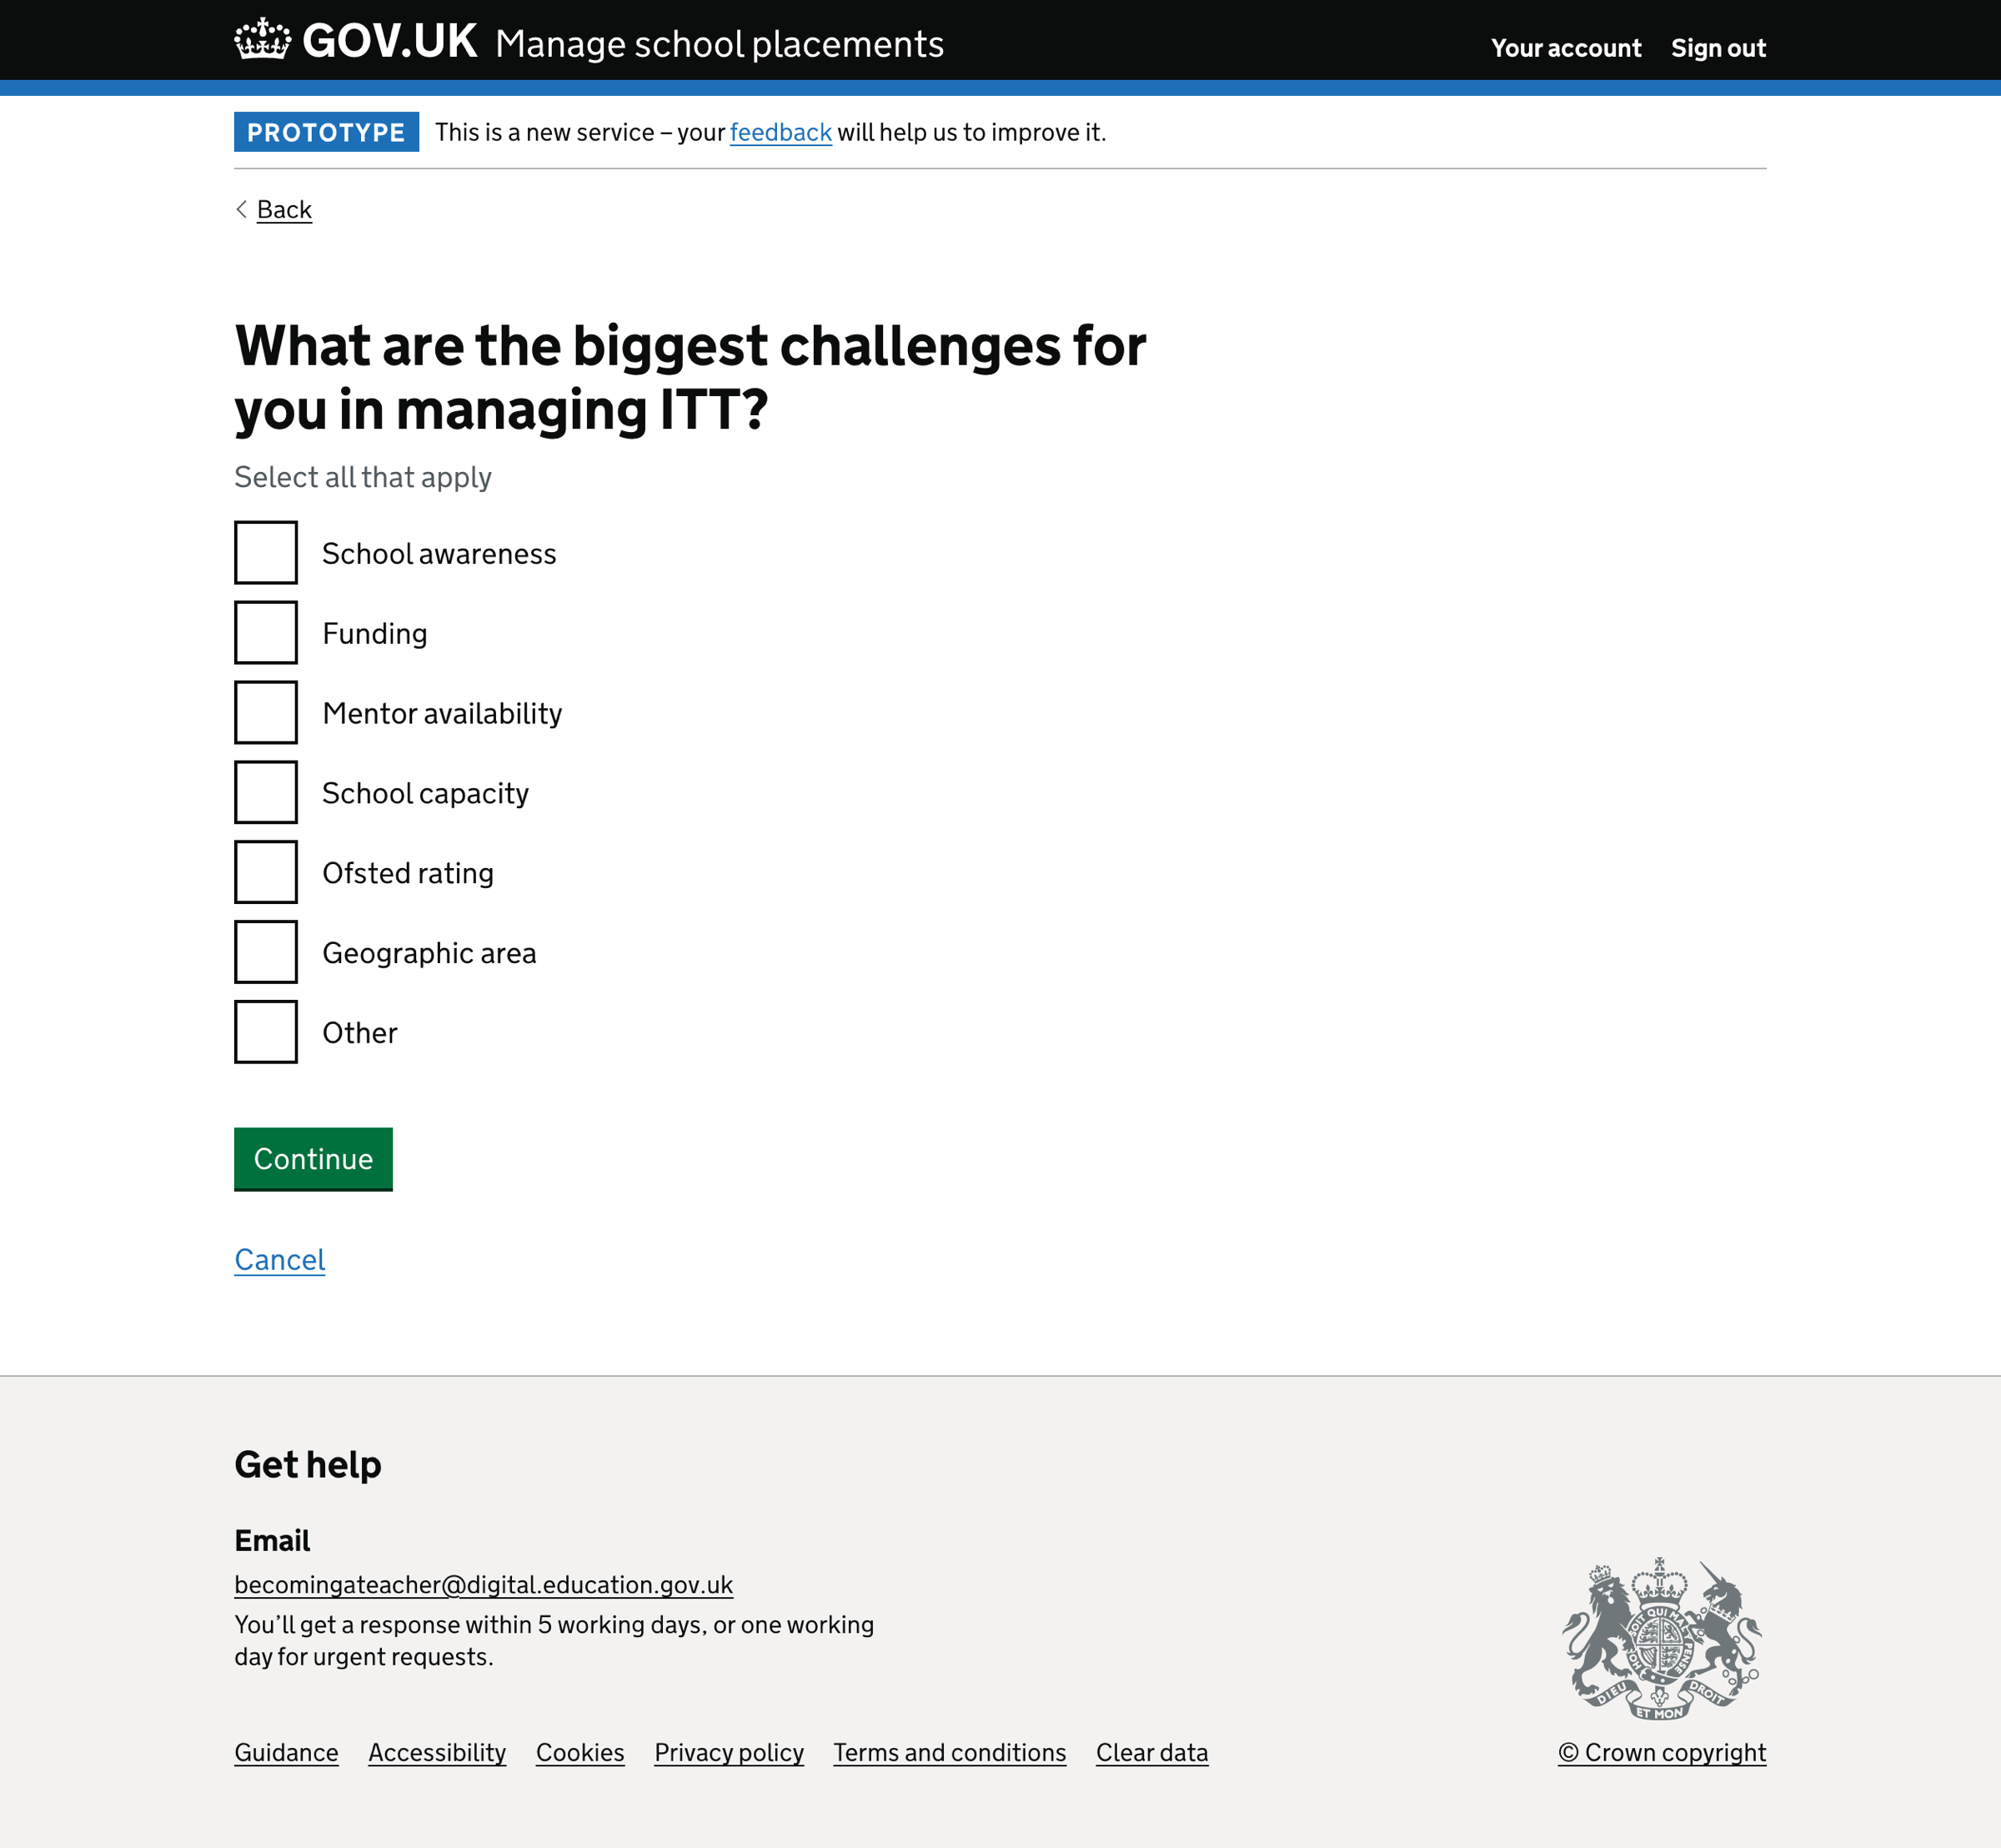 Image showing the question “What are the biggest challenges for you in managing ITT?”